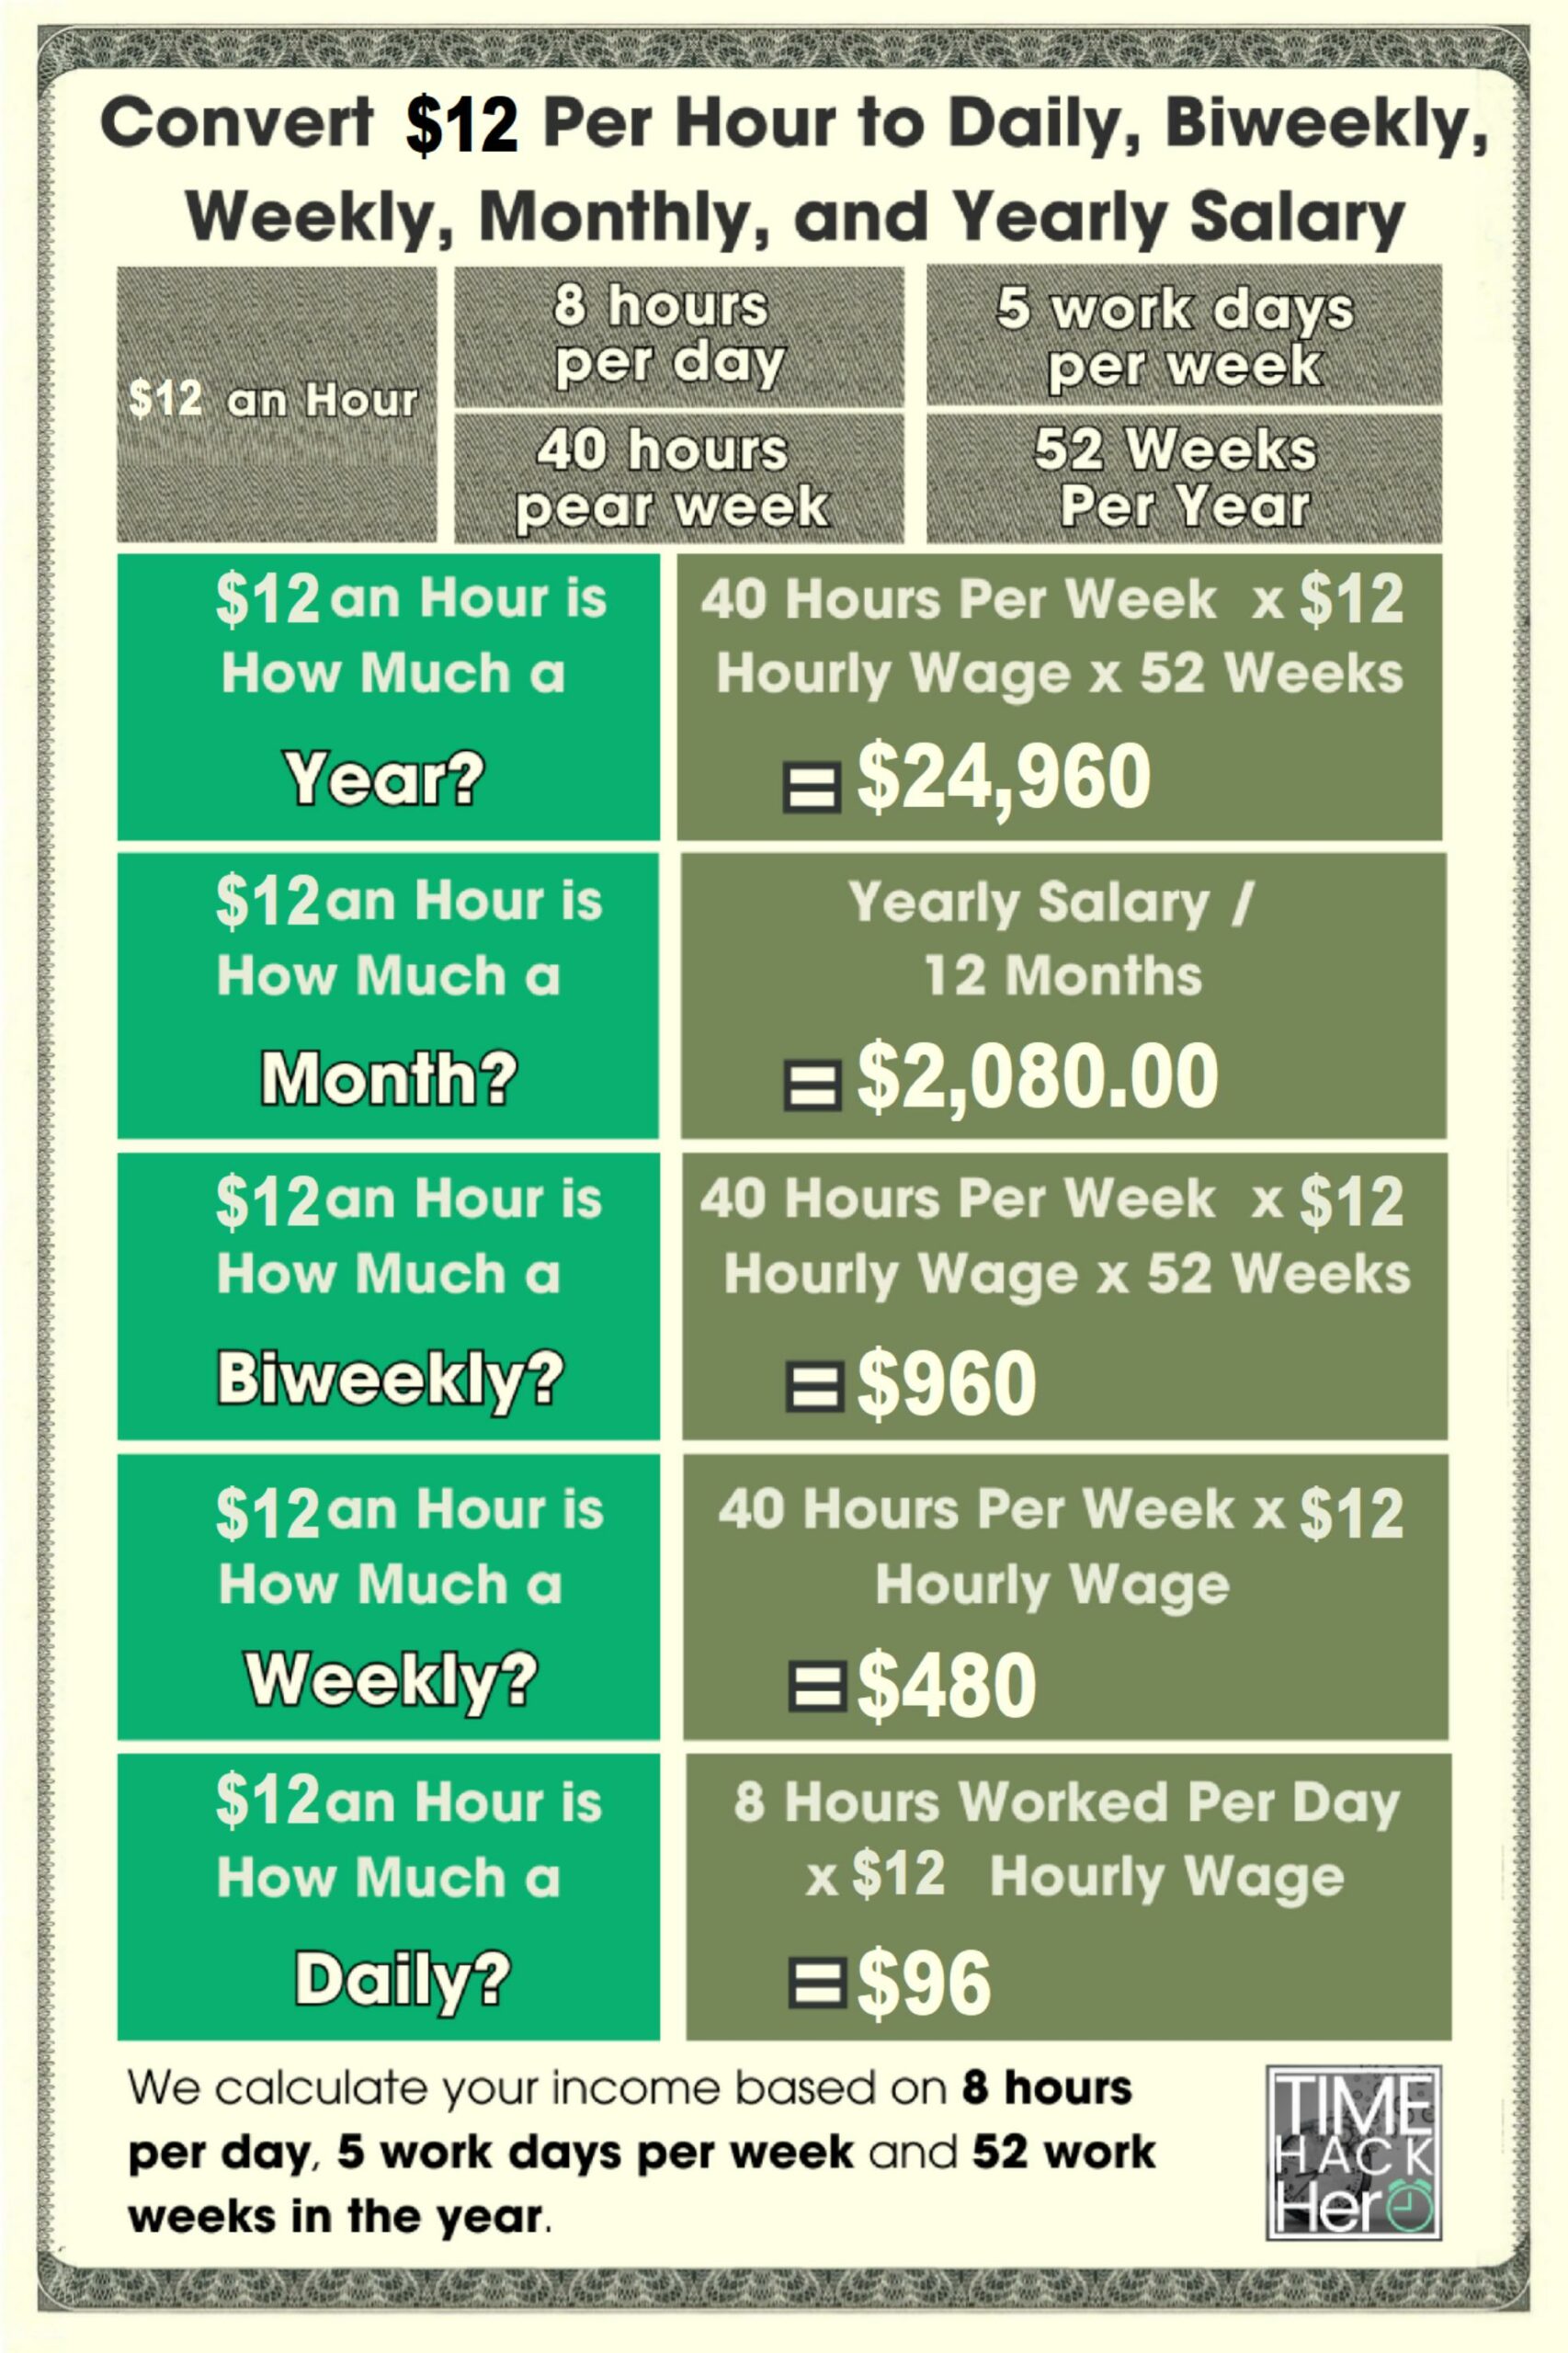 Convert $12 Per Hour to Weekly, Monthly, and Yearly Salary